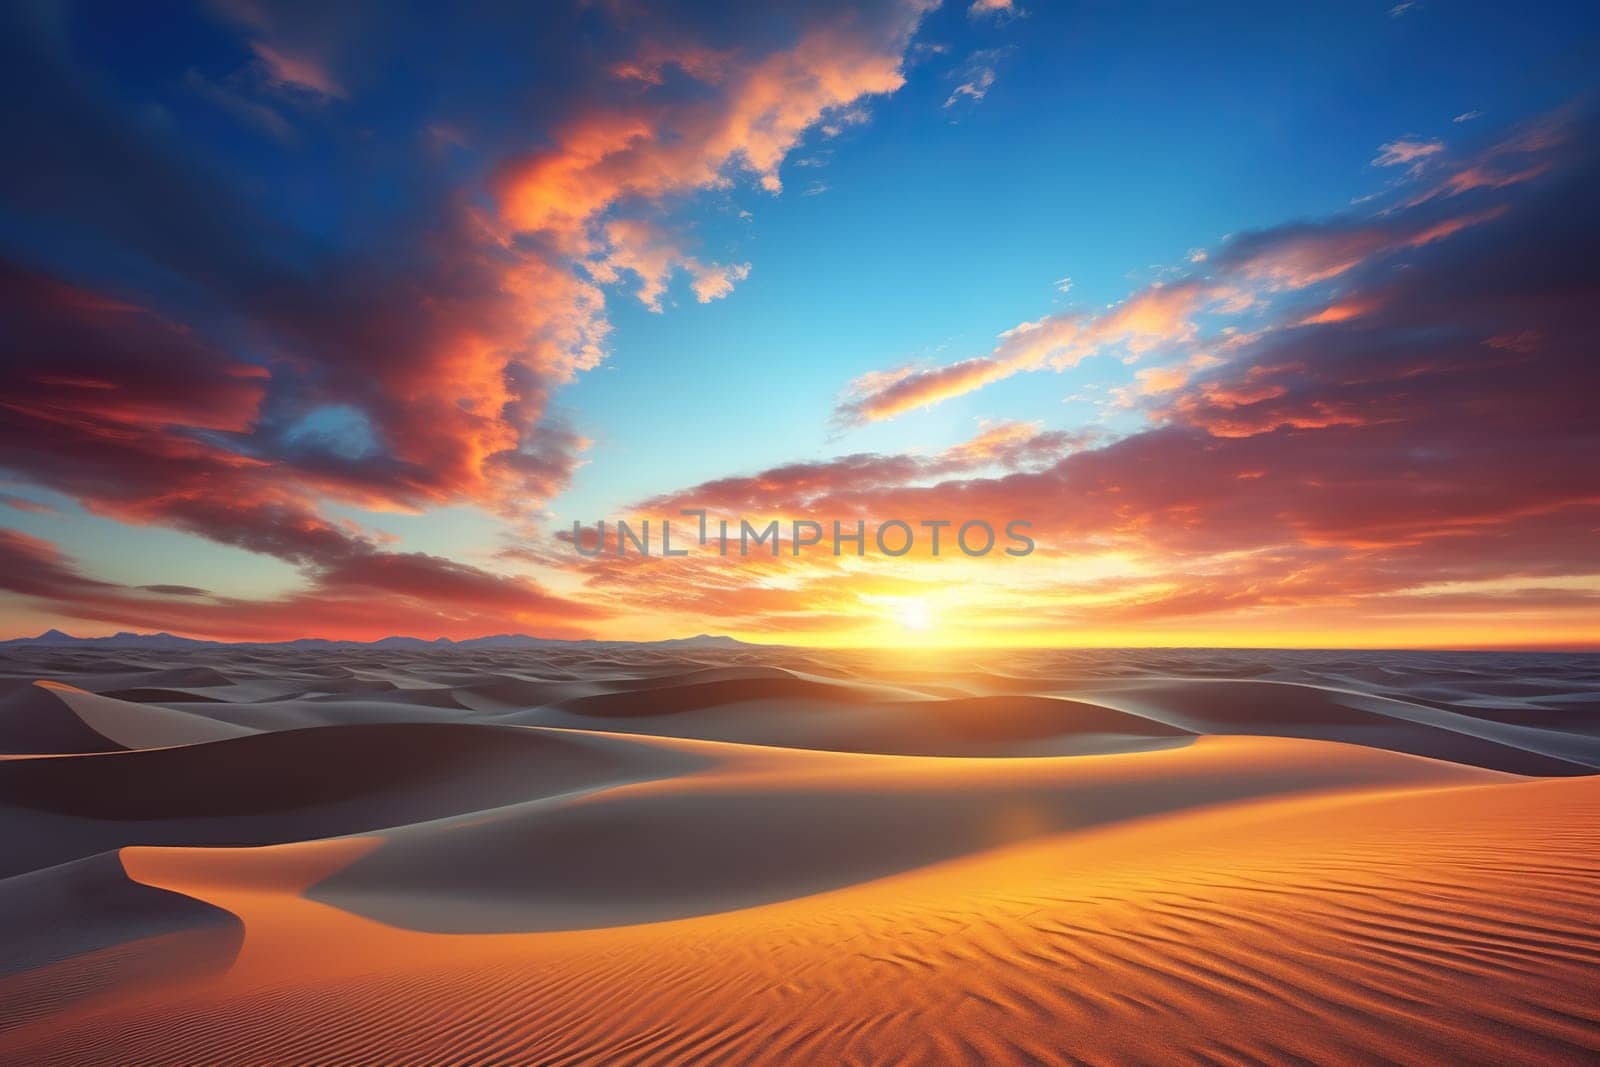 Sunset, dawn over sand dunes in the desert. Beautiful view of the desert.